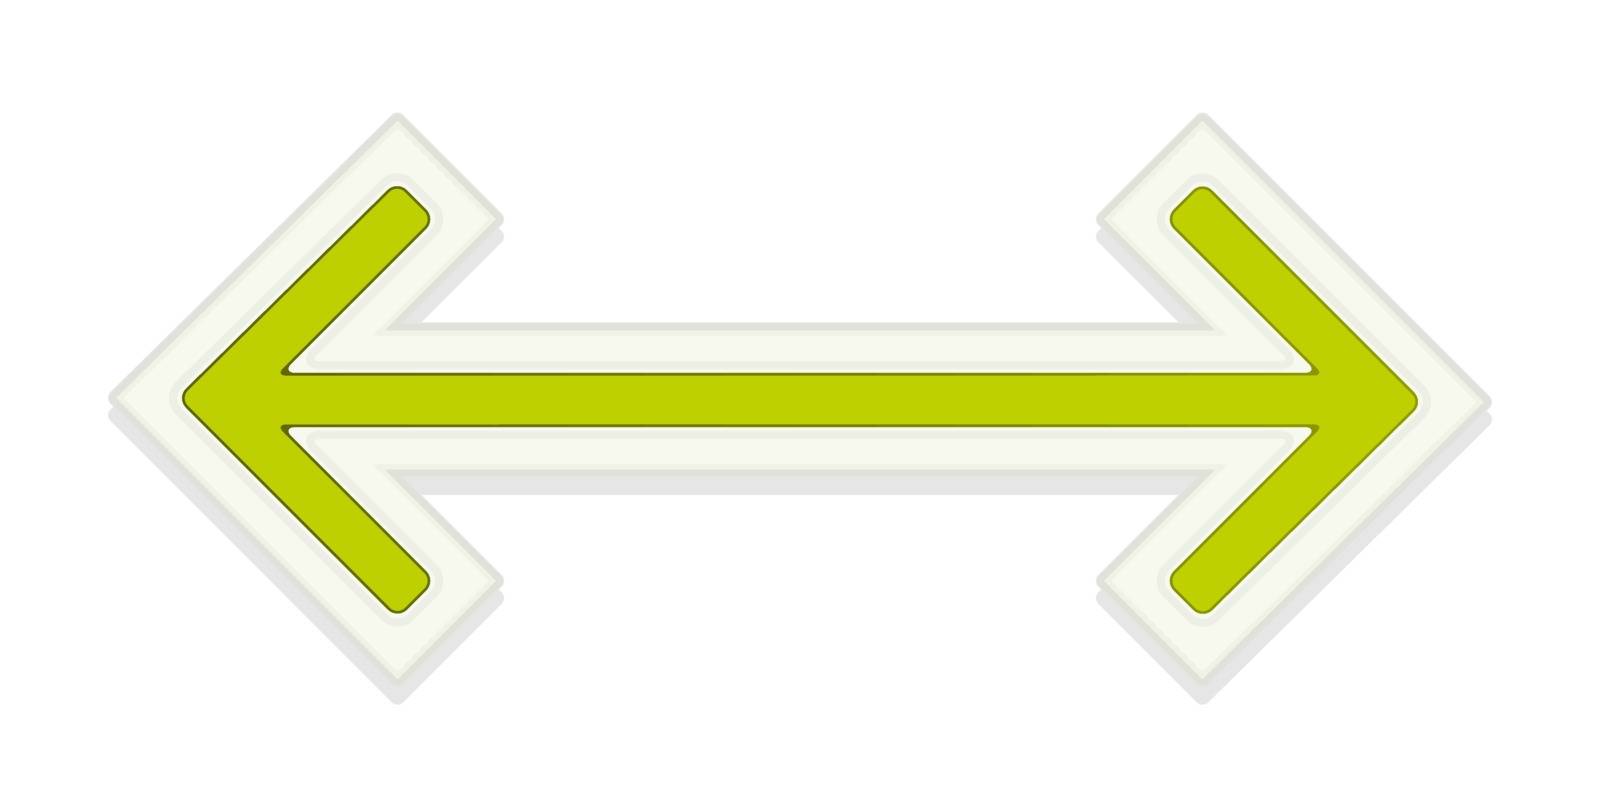 The green glossy arrow graphic element